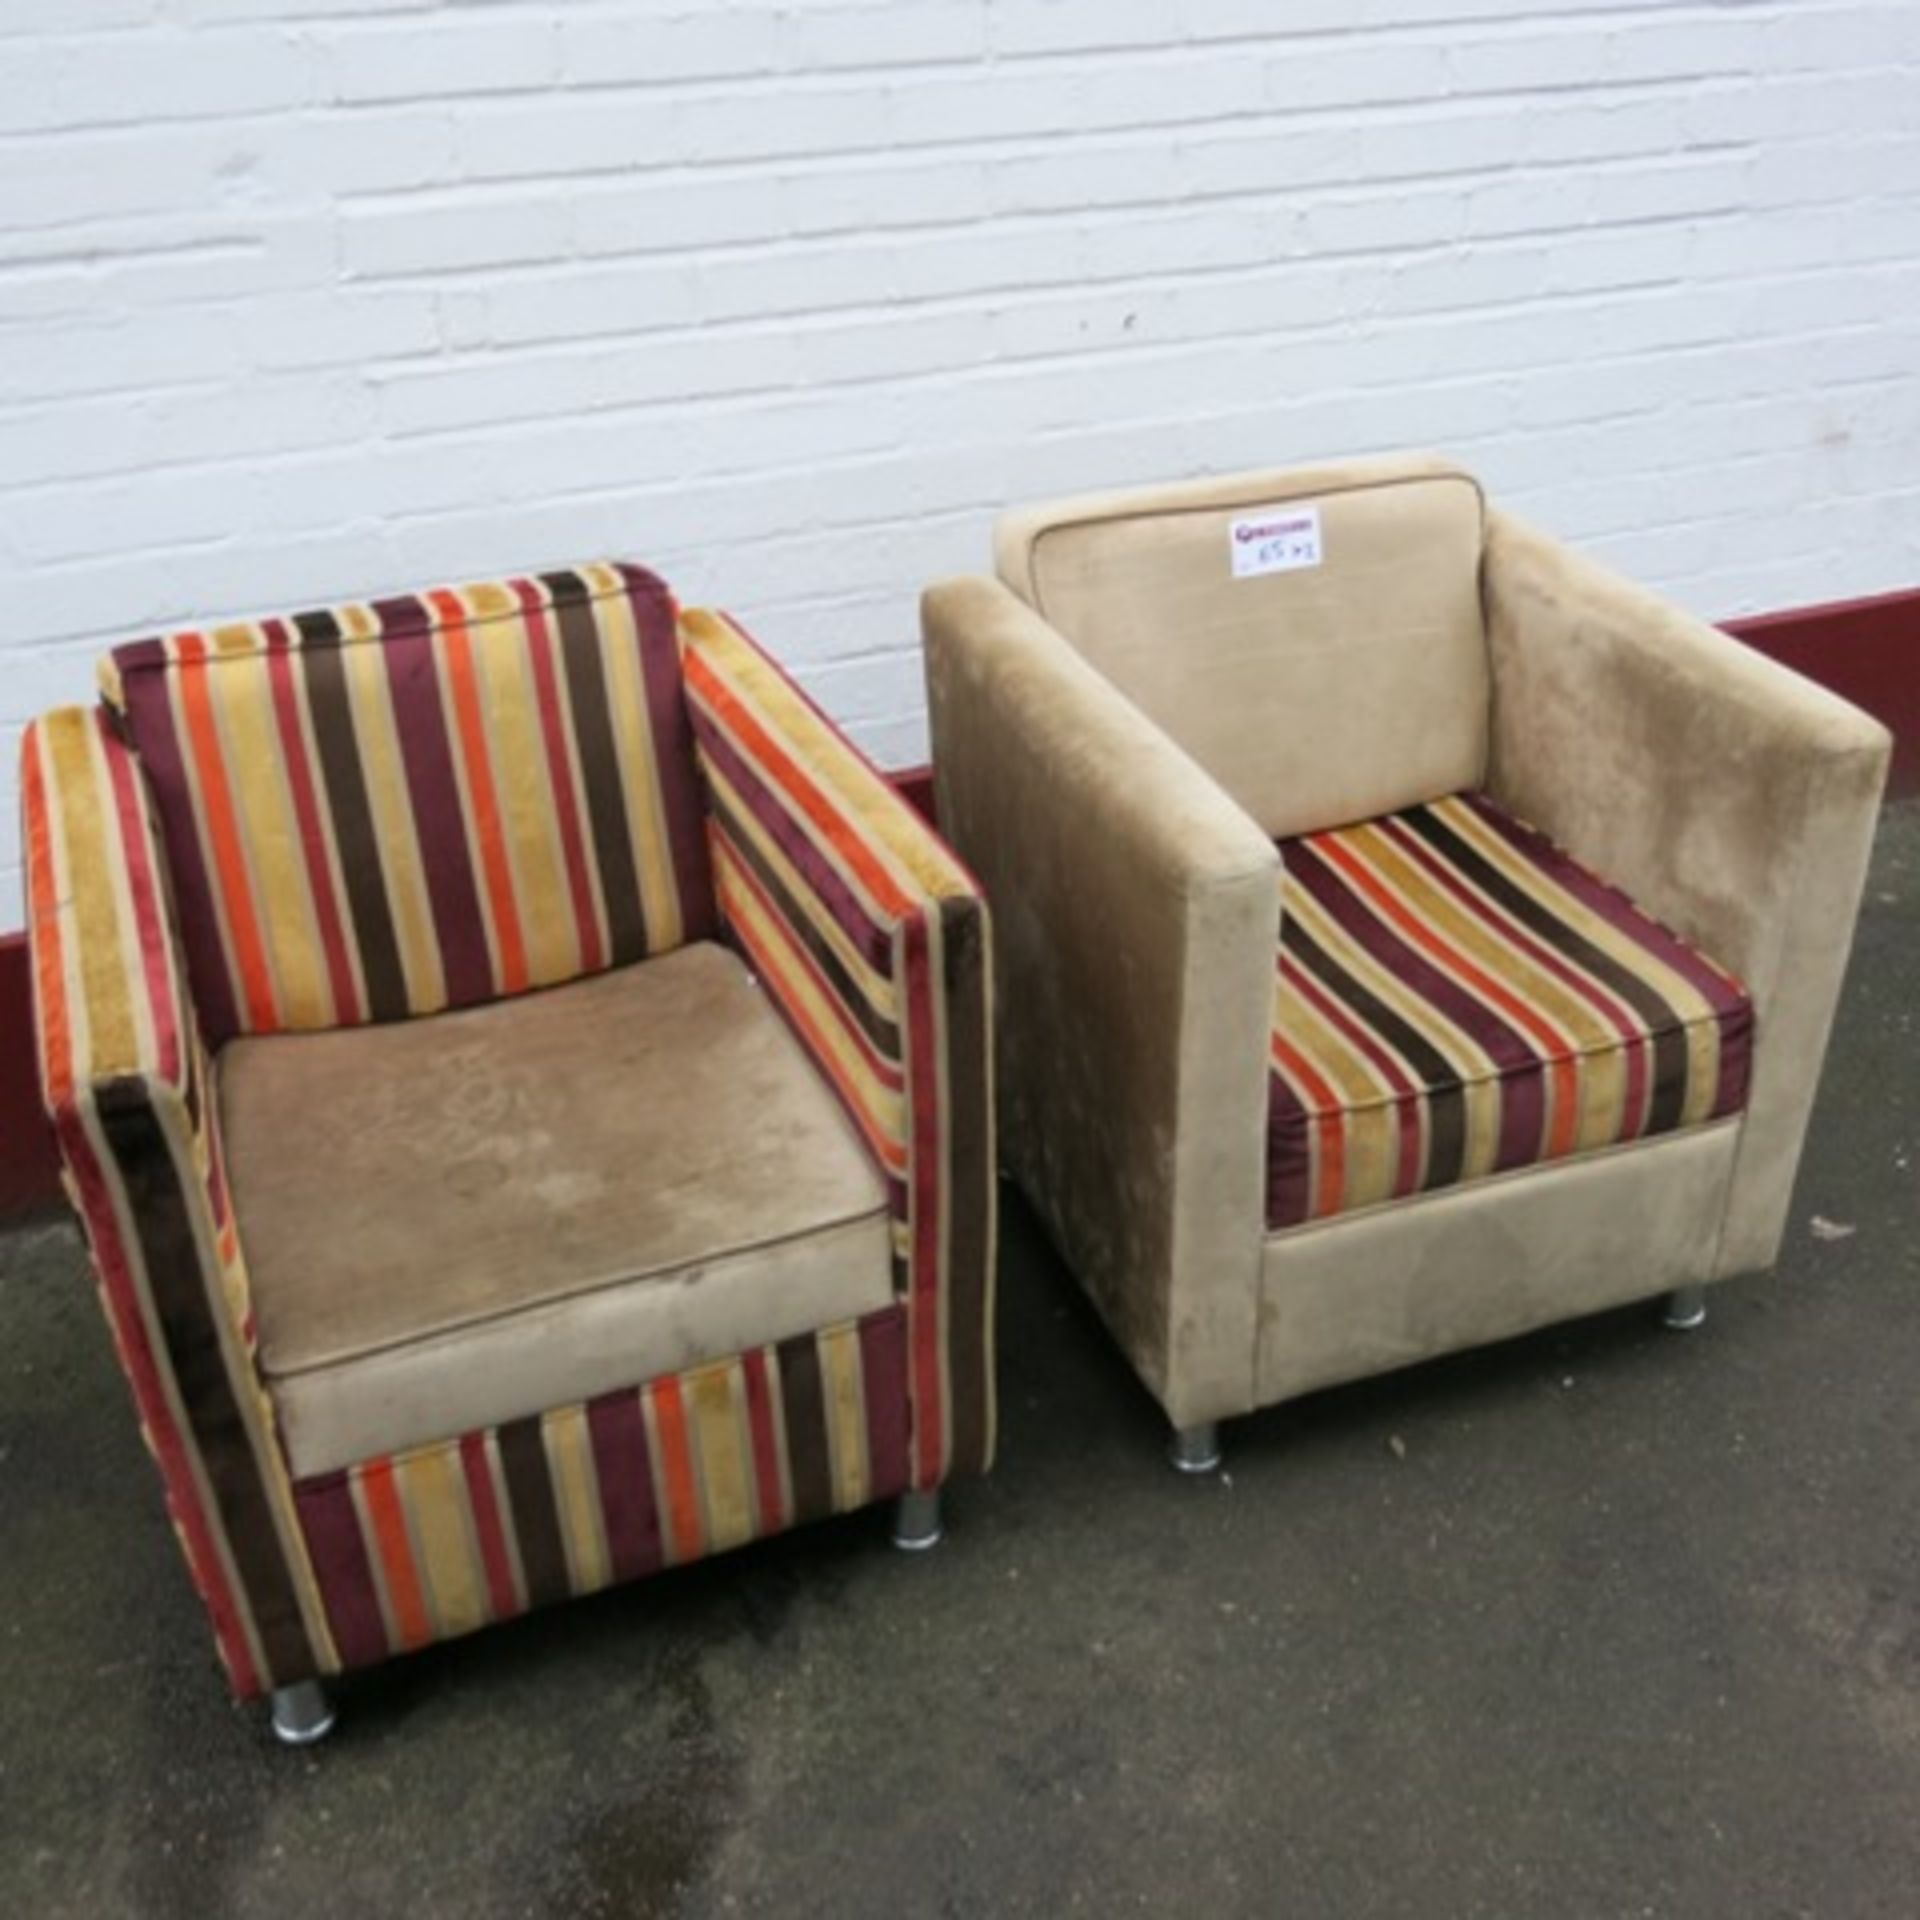 2 x Armchairs Upholstered in Multi-coloured Fabric on Metal Legs - Image 2 of 10